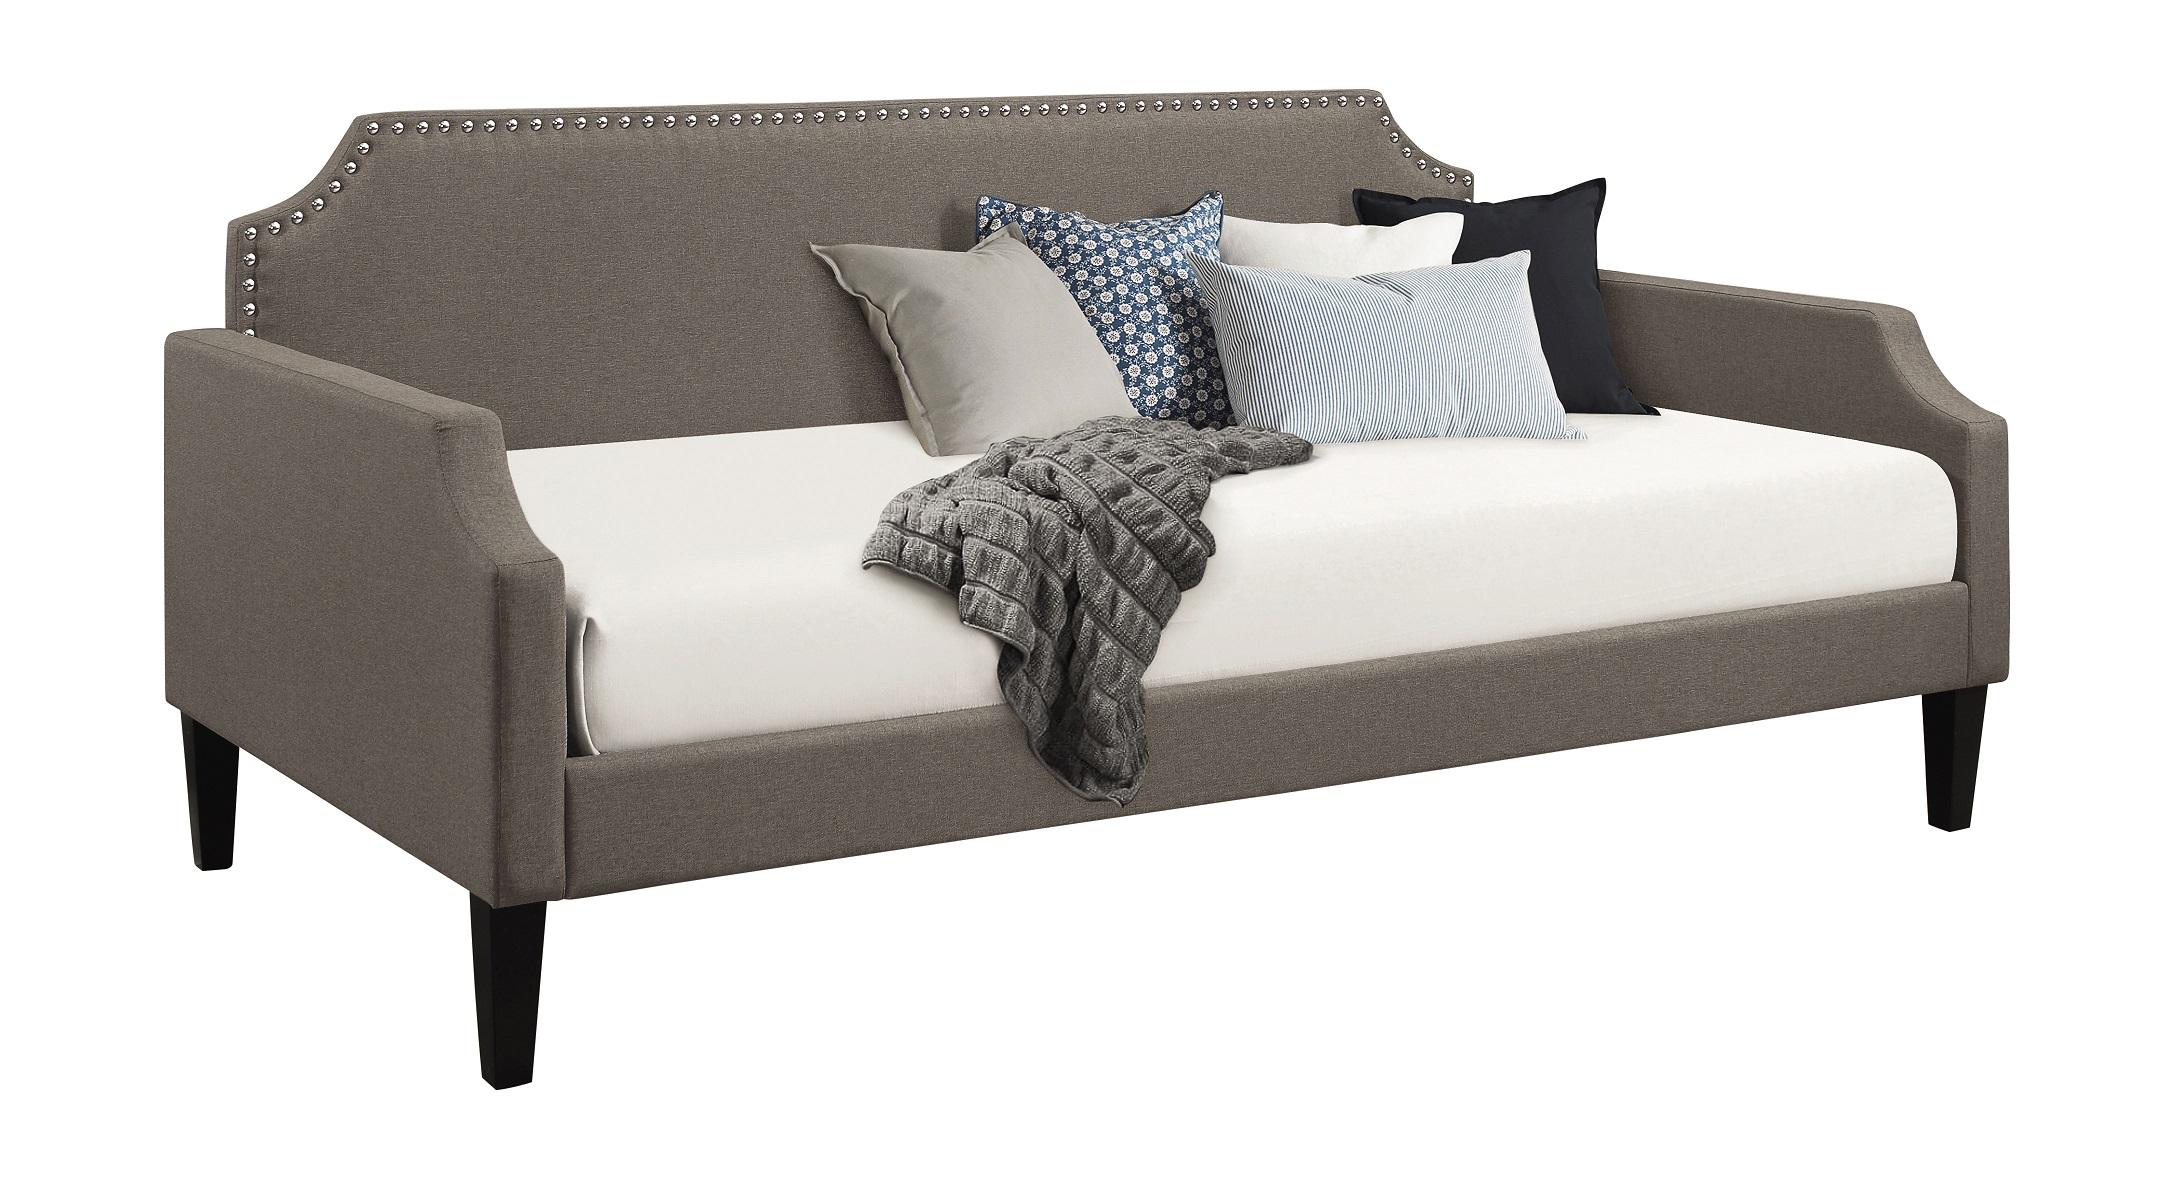 Transitional Daybed 300636 300636 in Gray 